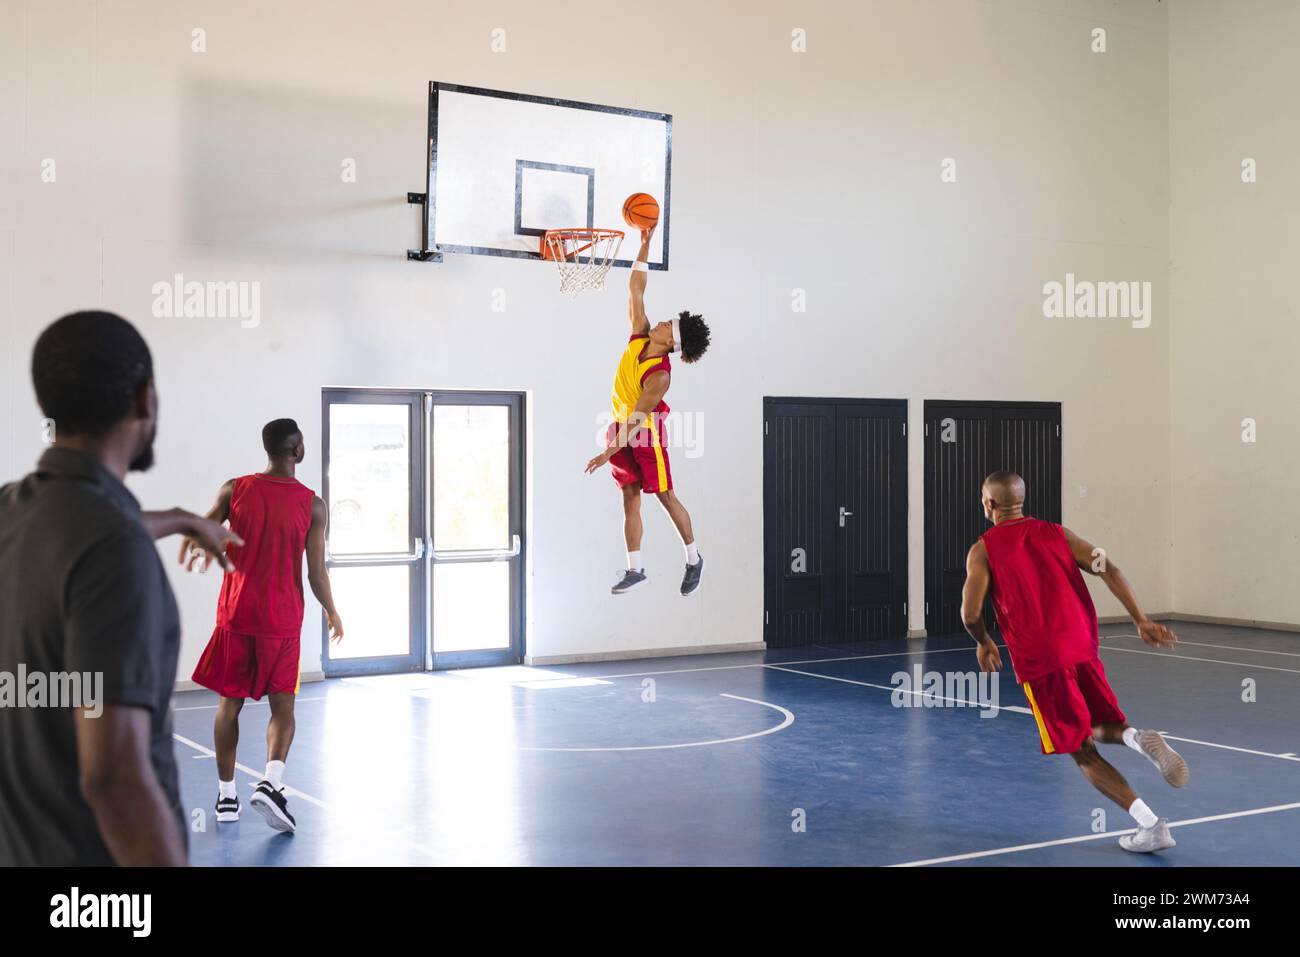 Young African American man jumps for a slam dunk in a basketball game at a gym Stock Photo